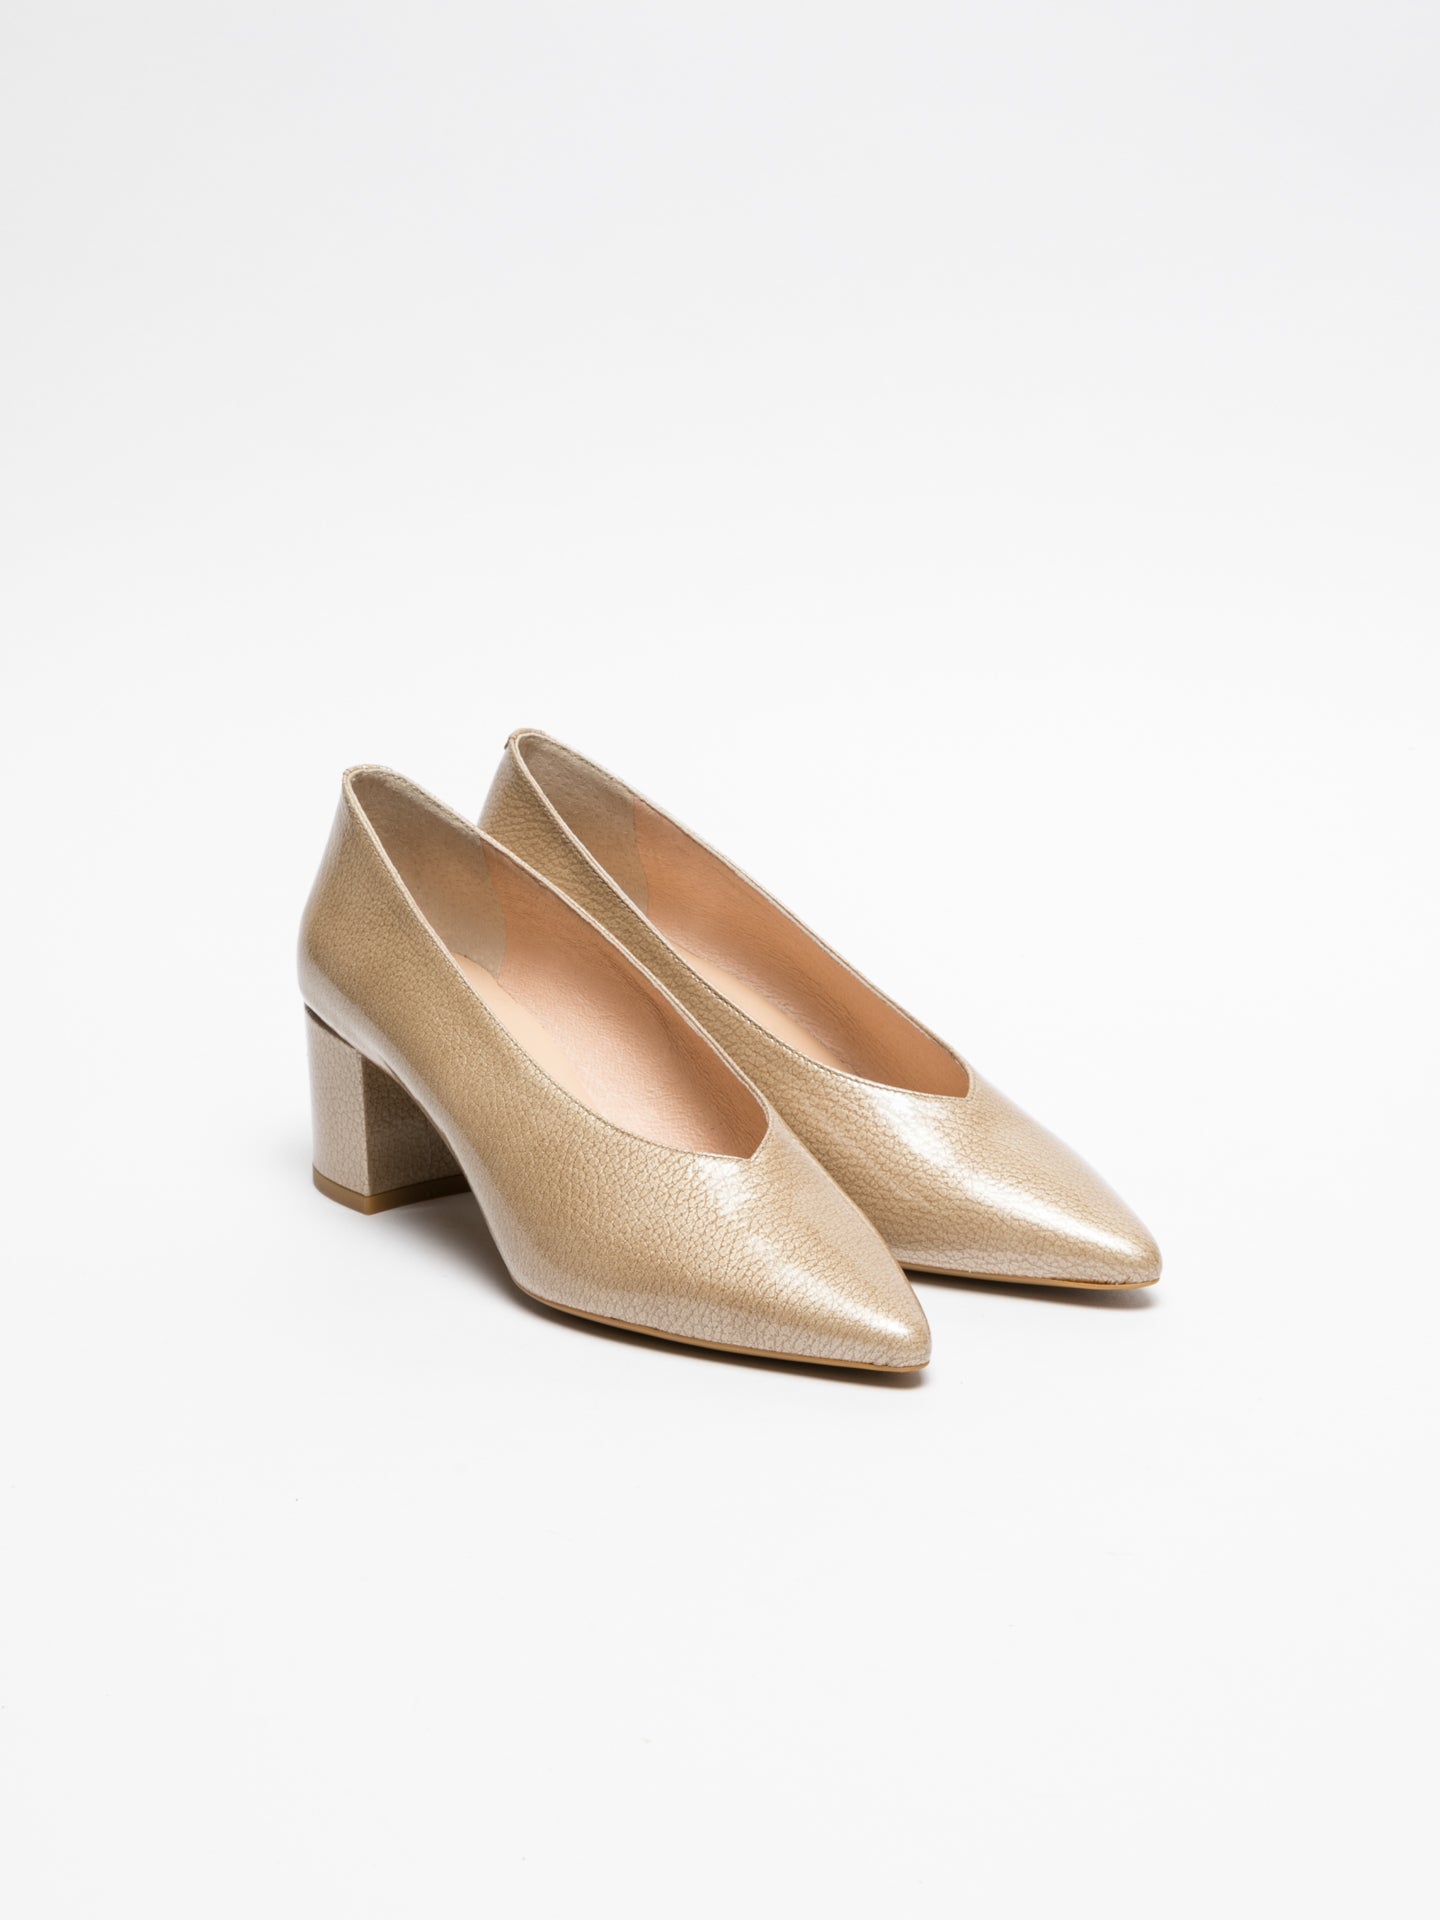 Sofia Costa Beige Pointed Toe Pumps Shoes